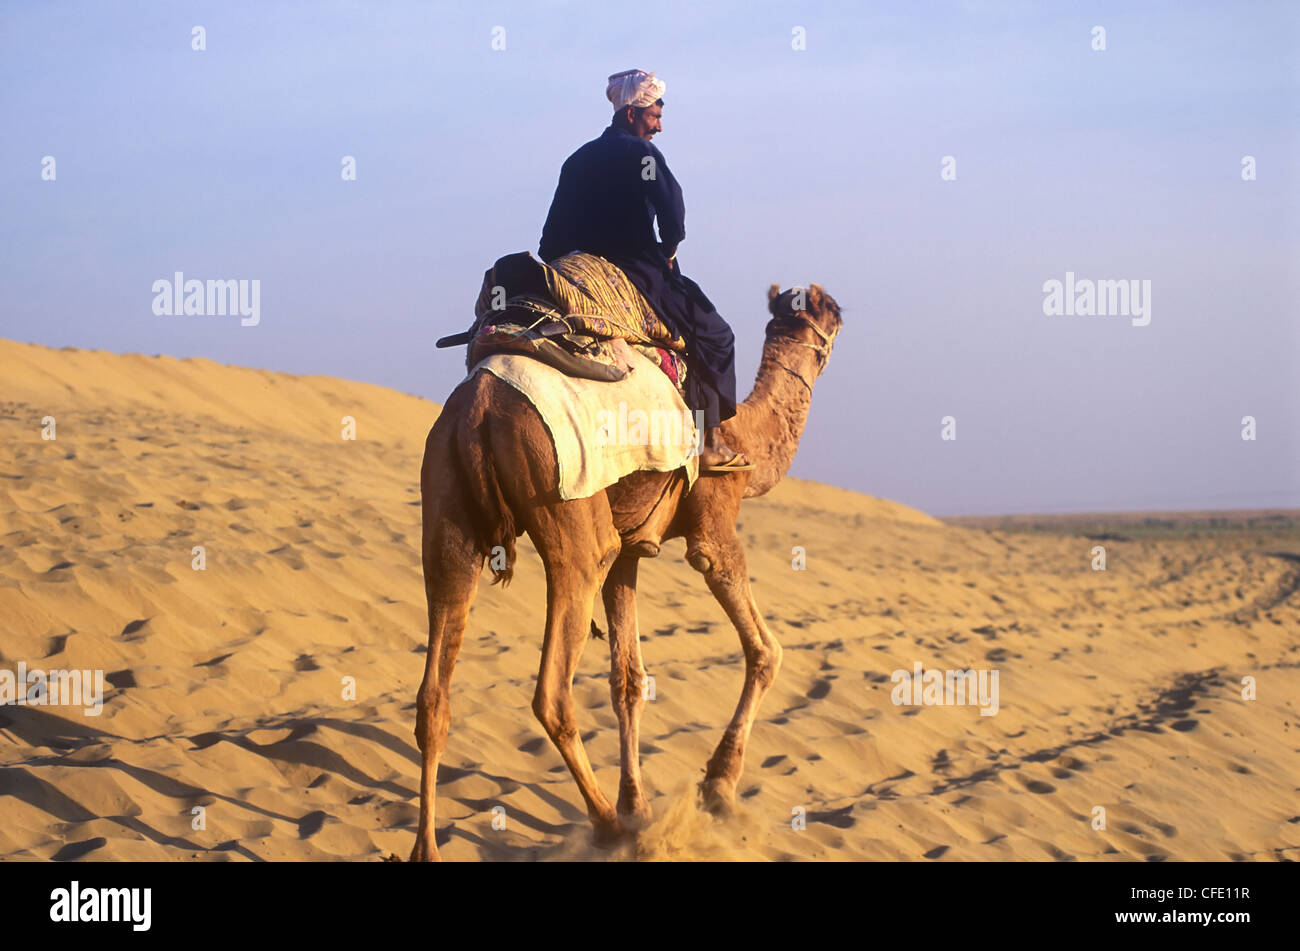 A camel driver on the Sam Sand Dunes, located 40 km west of Jaisalmer, India. Stock Photo